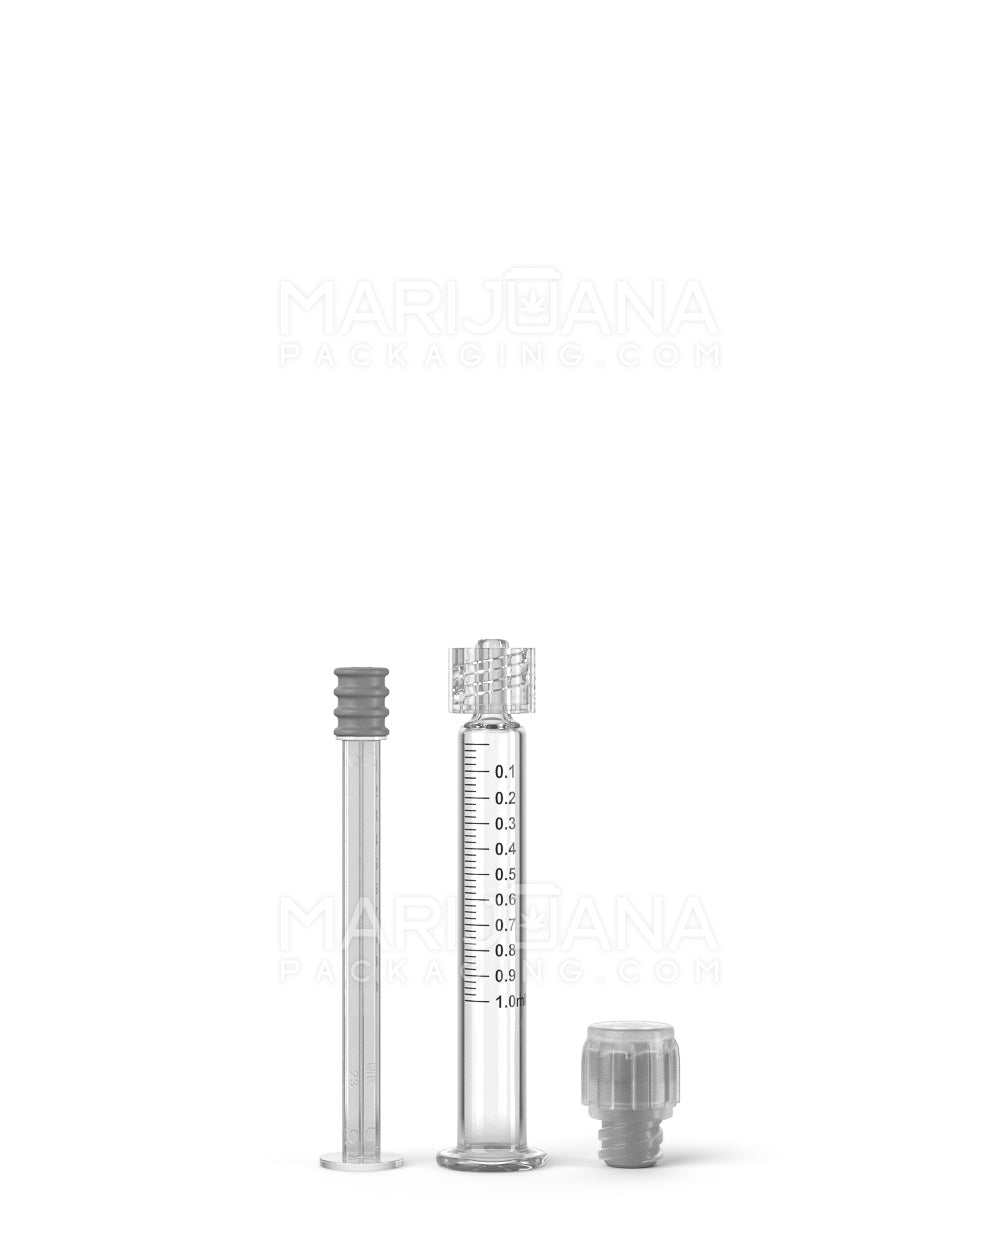 Child Resistant & Luer Lock | Long Glass Dab Applicator Syringes | 1mL - 0.1mL Increments - 100 Count - 3